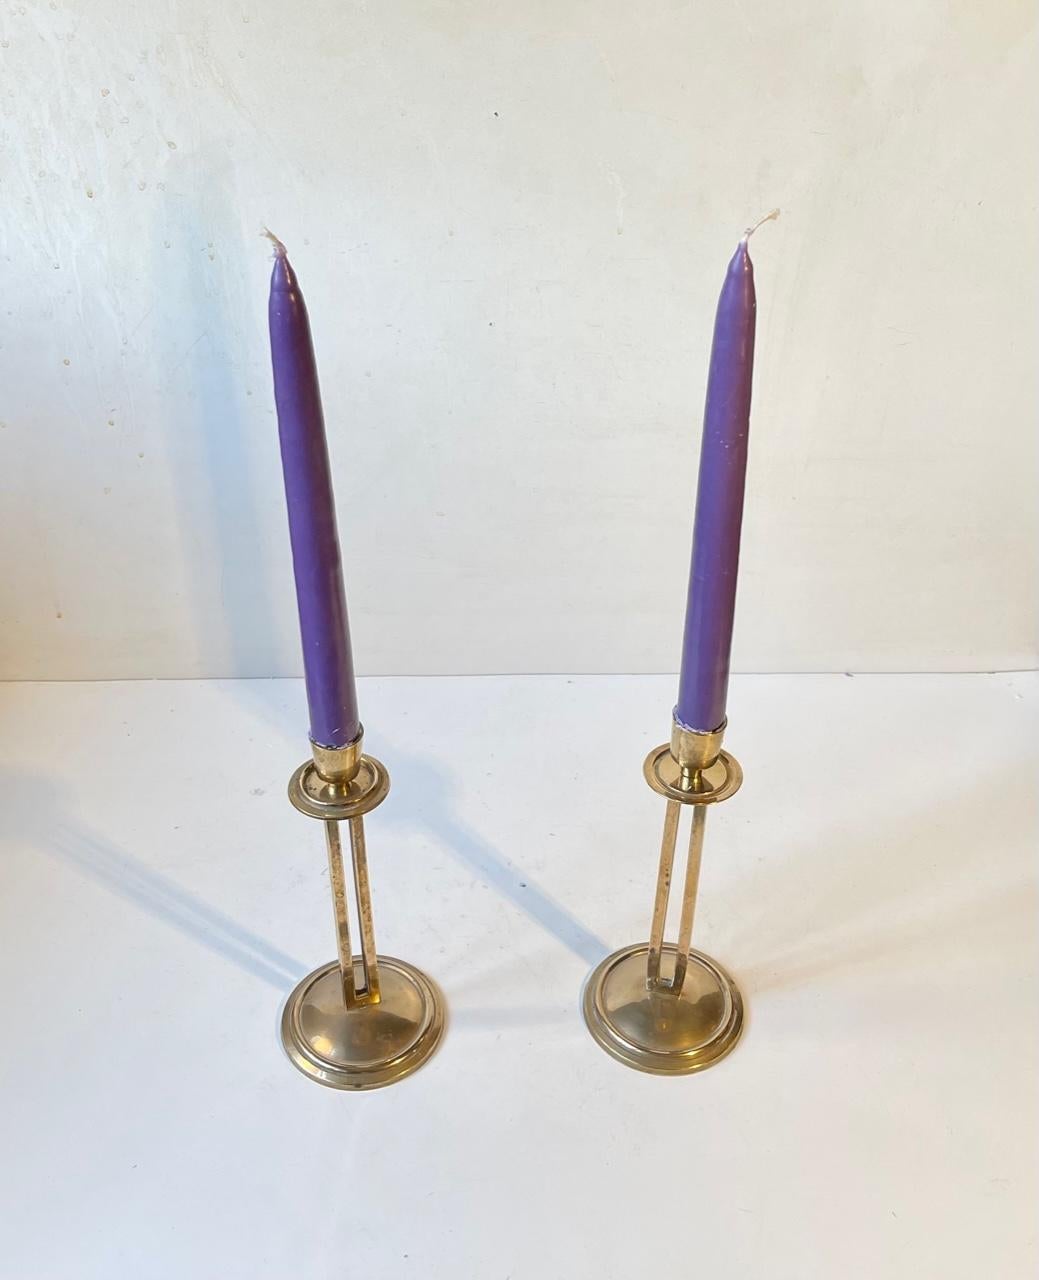 A pair of plain jugendstil candlesticks fashioned from solid brass. Made in Scandinavia during the early 20th century. Measurements: H: 20 cm, D: 9 cm (base). They can be fitted with regular sized candles.